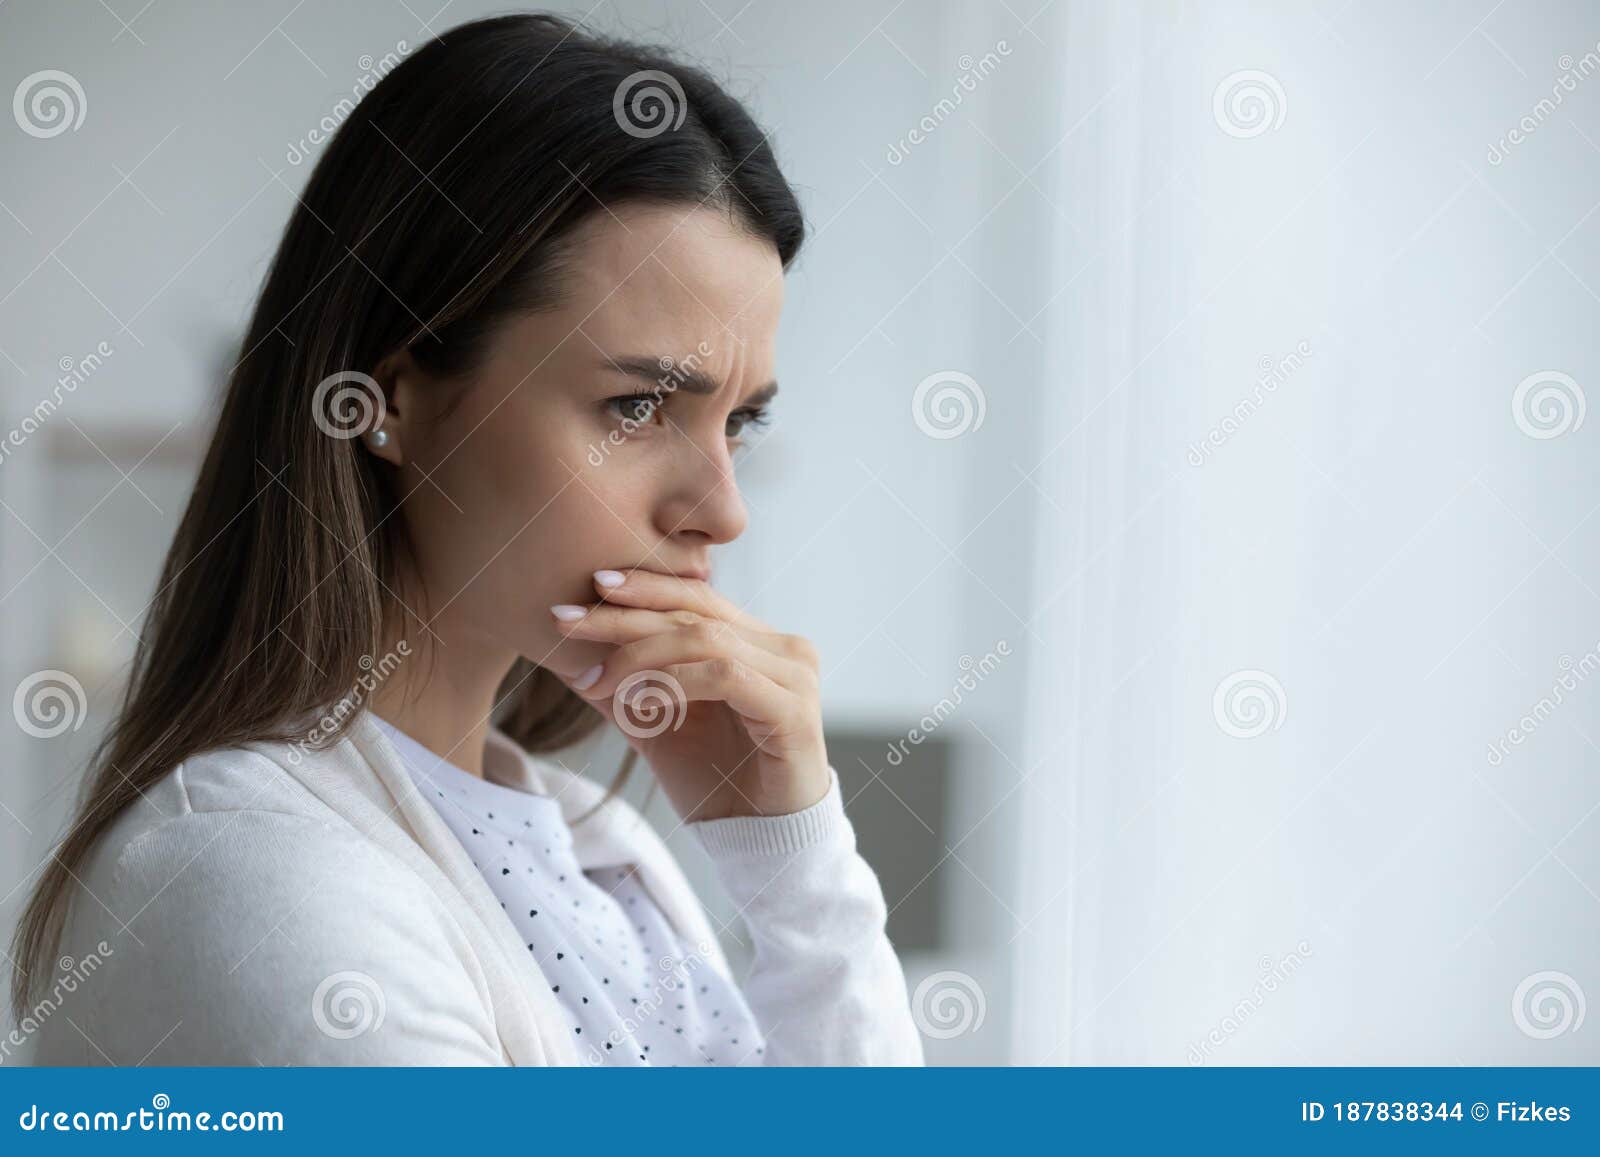 woman looking in distance feels upset having life troubles